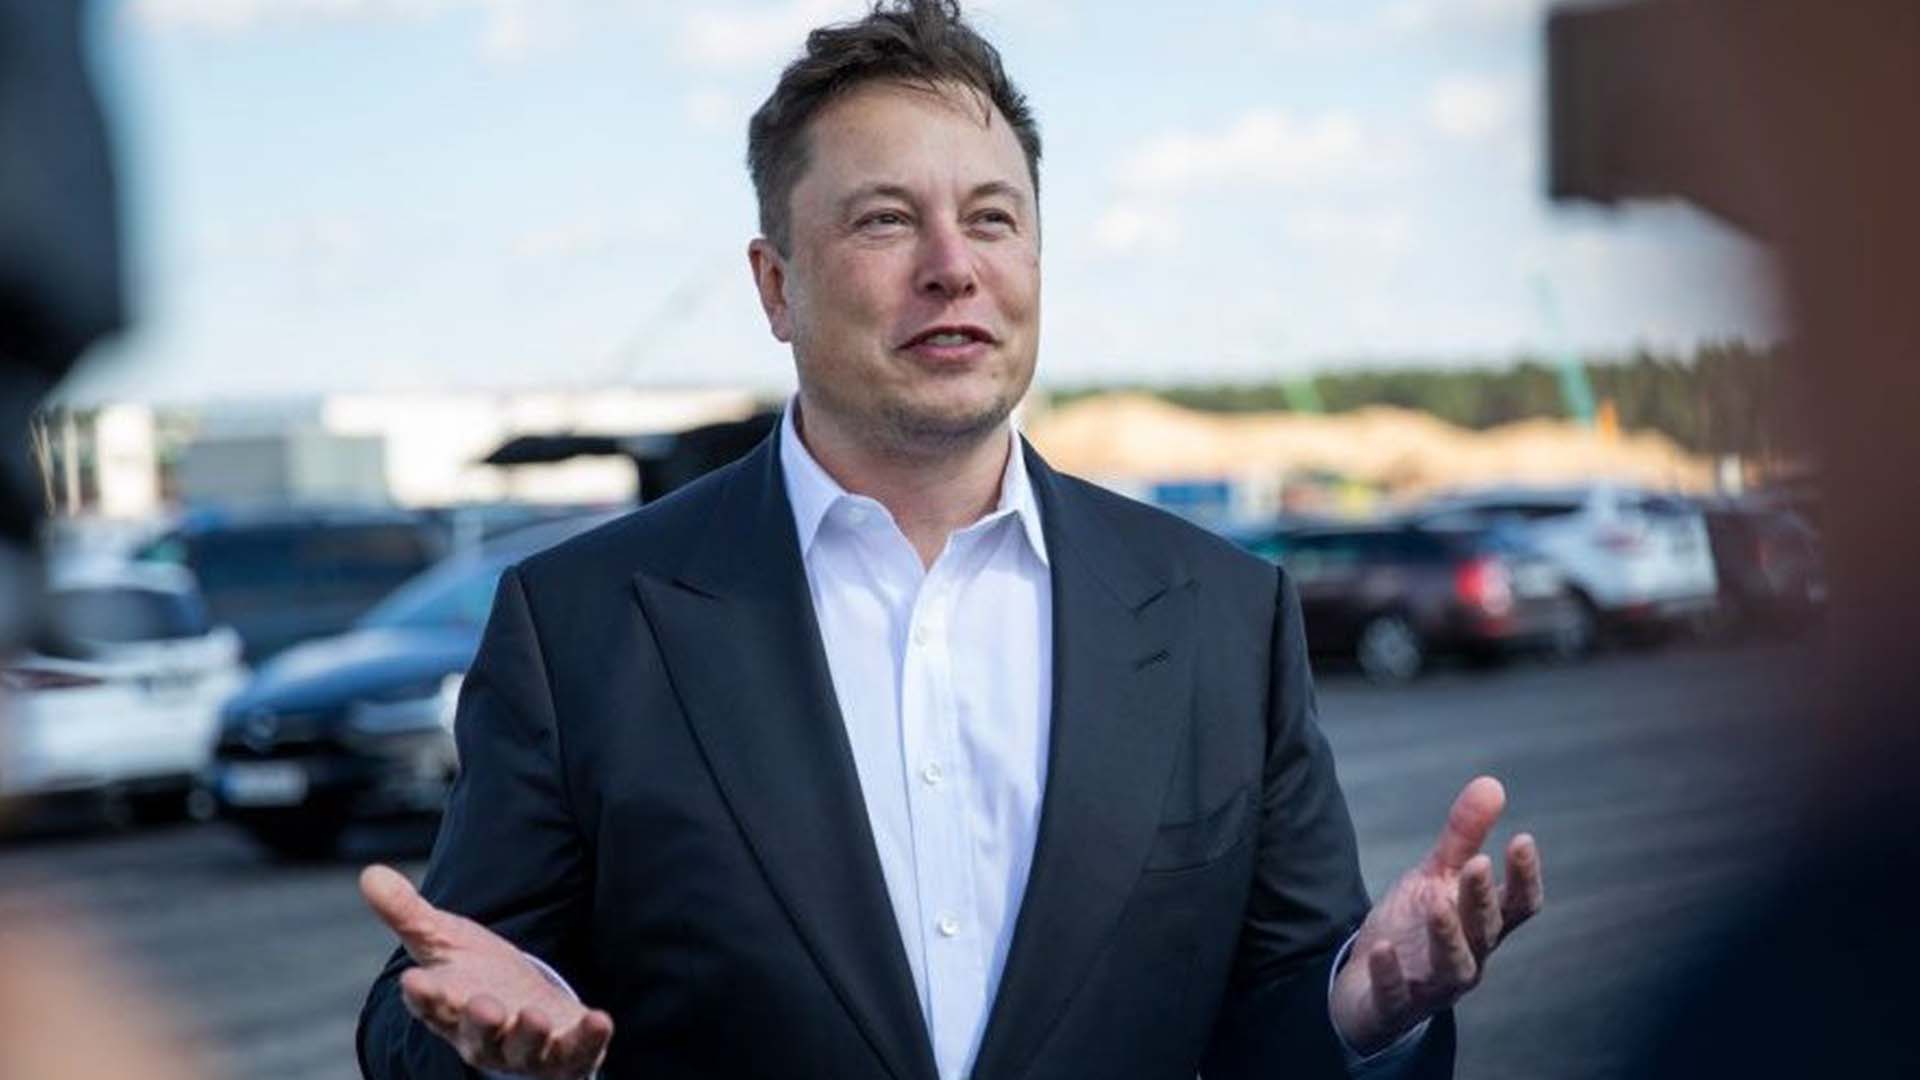 Elon Musk became the second richest man in the world